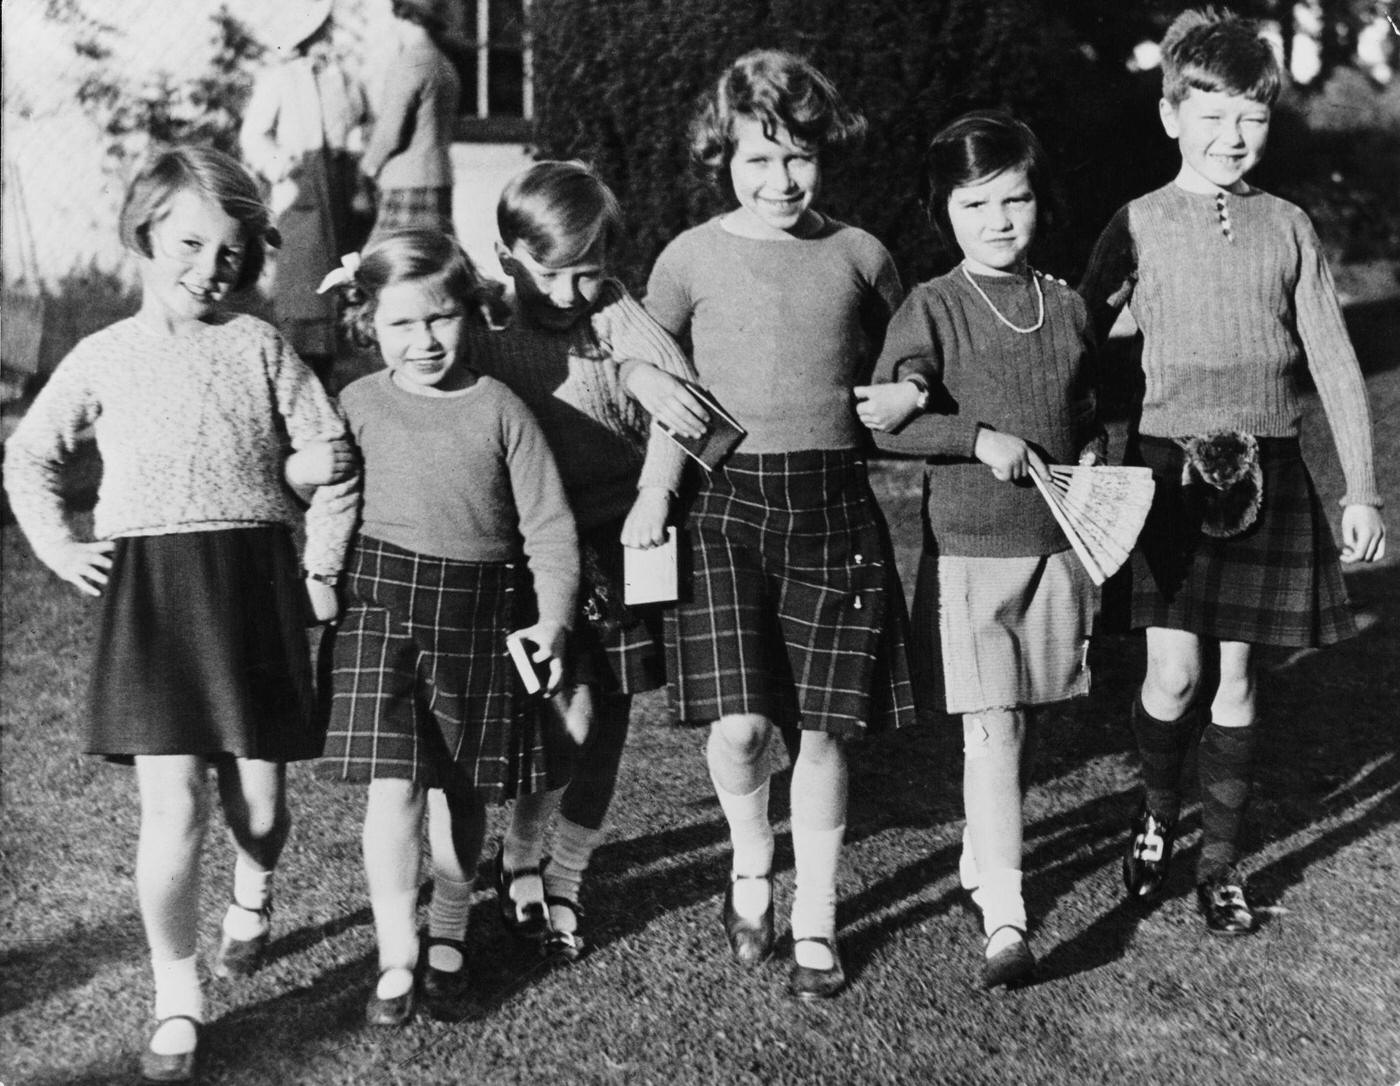 Princess Elizabeth and Princess Margaret, join other young guests to celebrate the 6th birthday of Master James Carnegieat Elsick House in Kincardineshire, 1935.